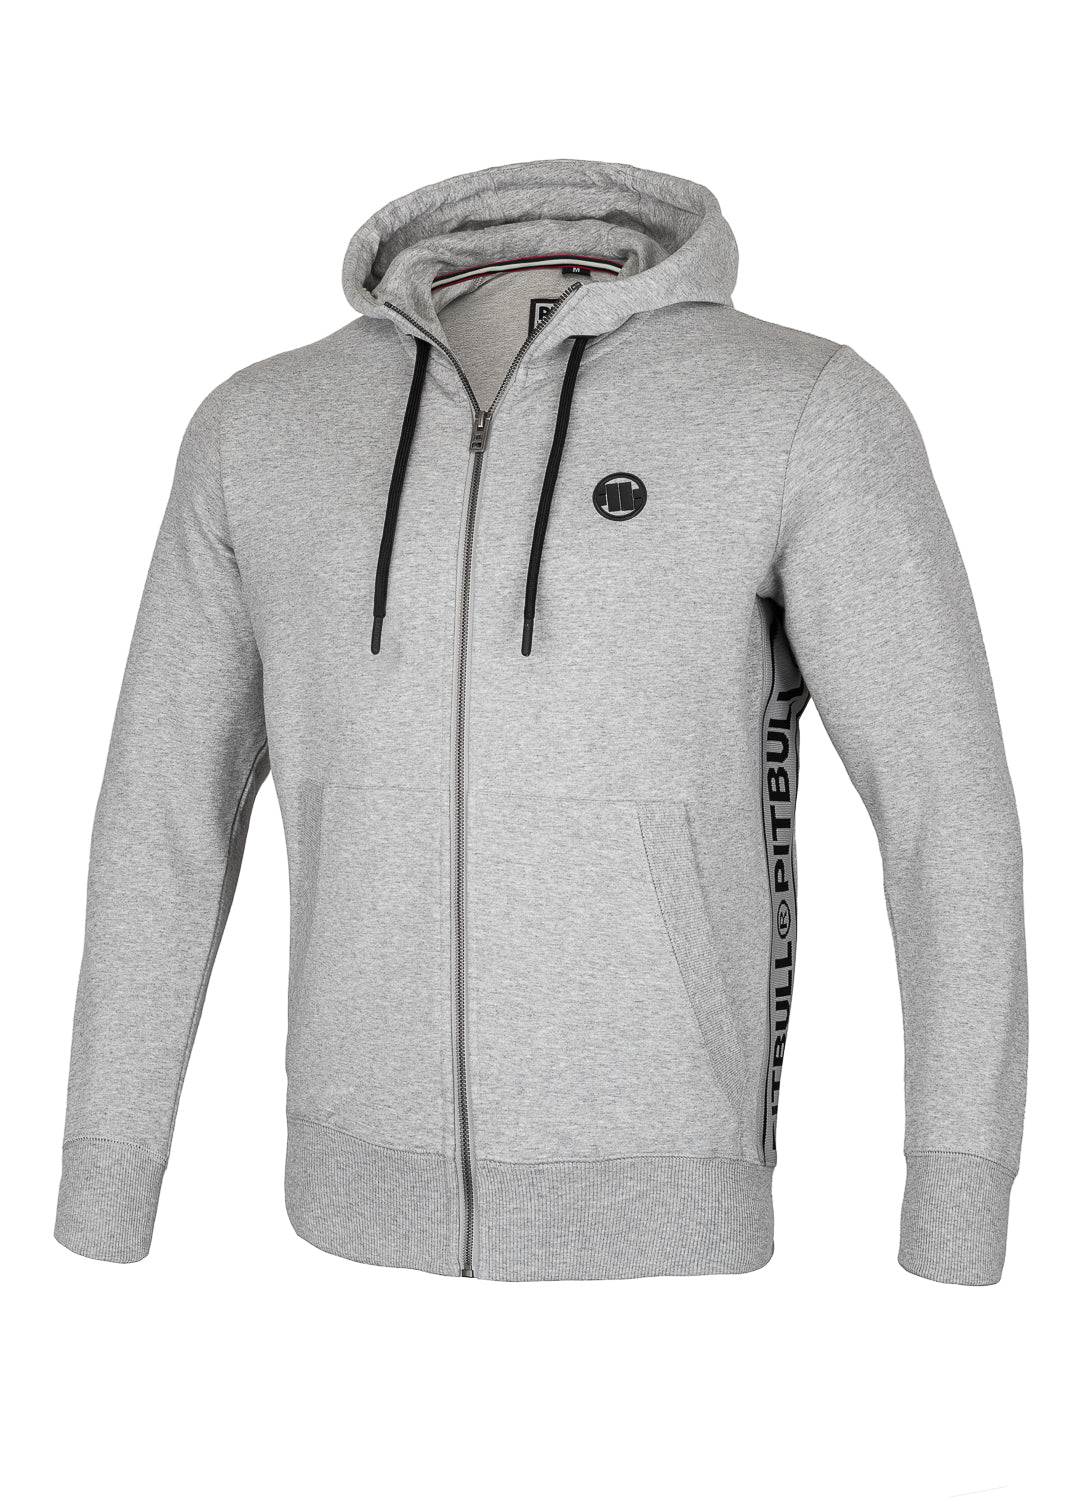 RENO French Terry Grey Hooded Zip.